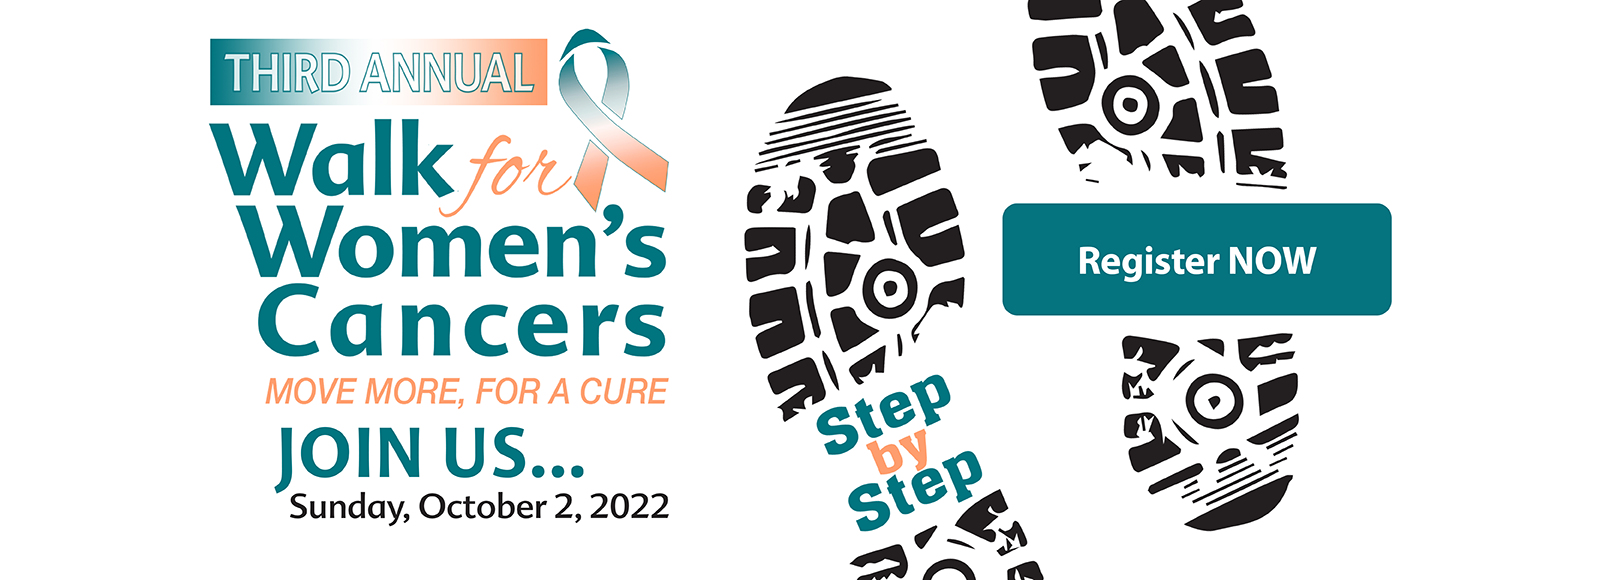 Third Annual Walk for Women's Cancers